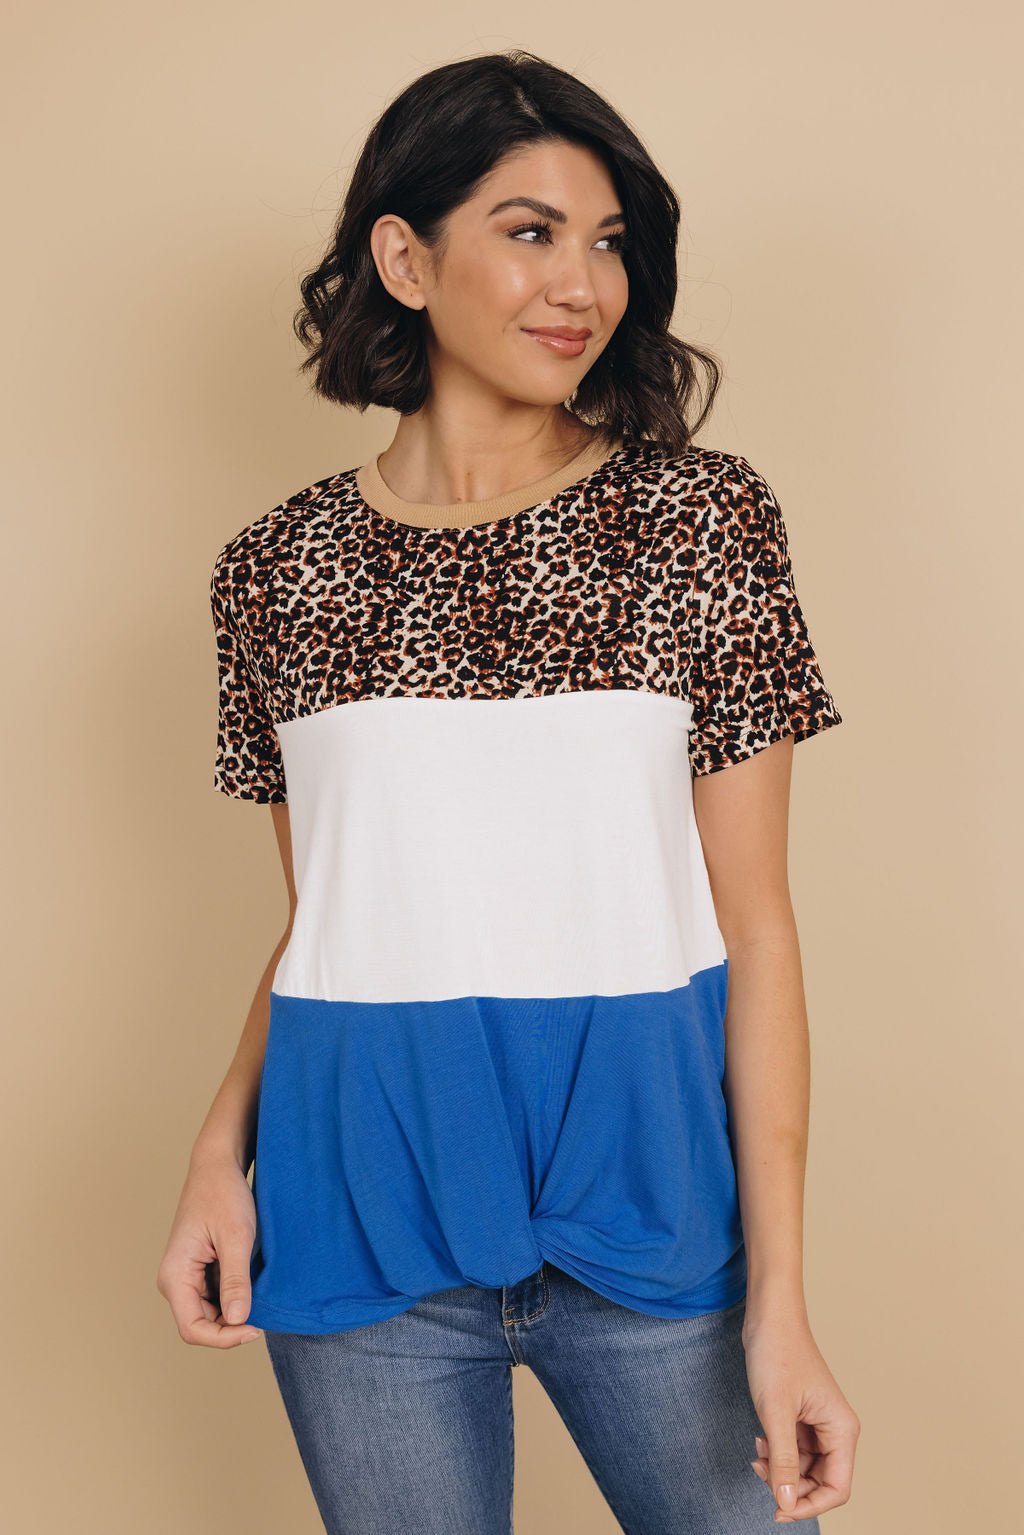 She's The Boss Colorblock Leopard Tee